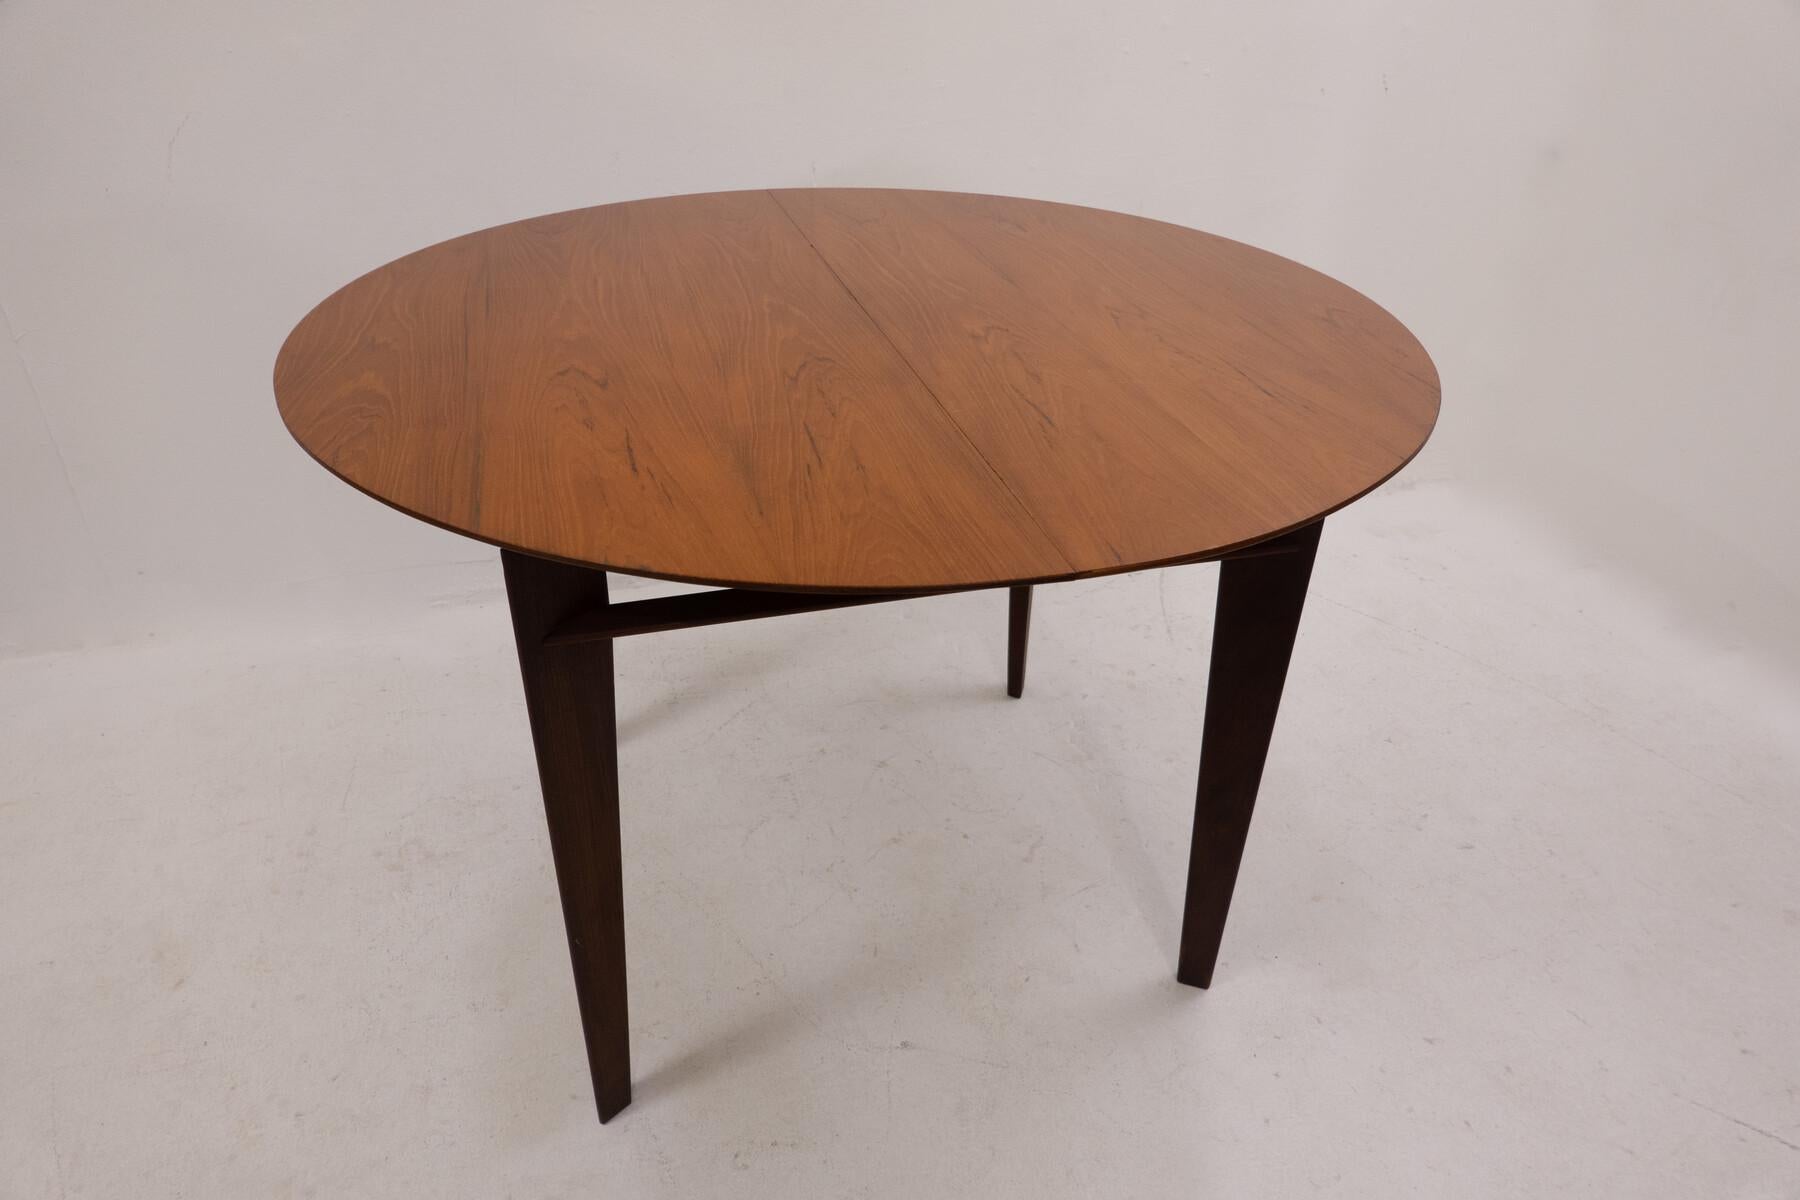 Mid-Century Modern Extending Dining Table by Vittorio Dassi, Teak, Italy, 1950s For Sale 3